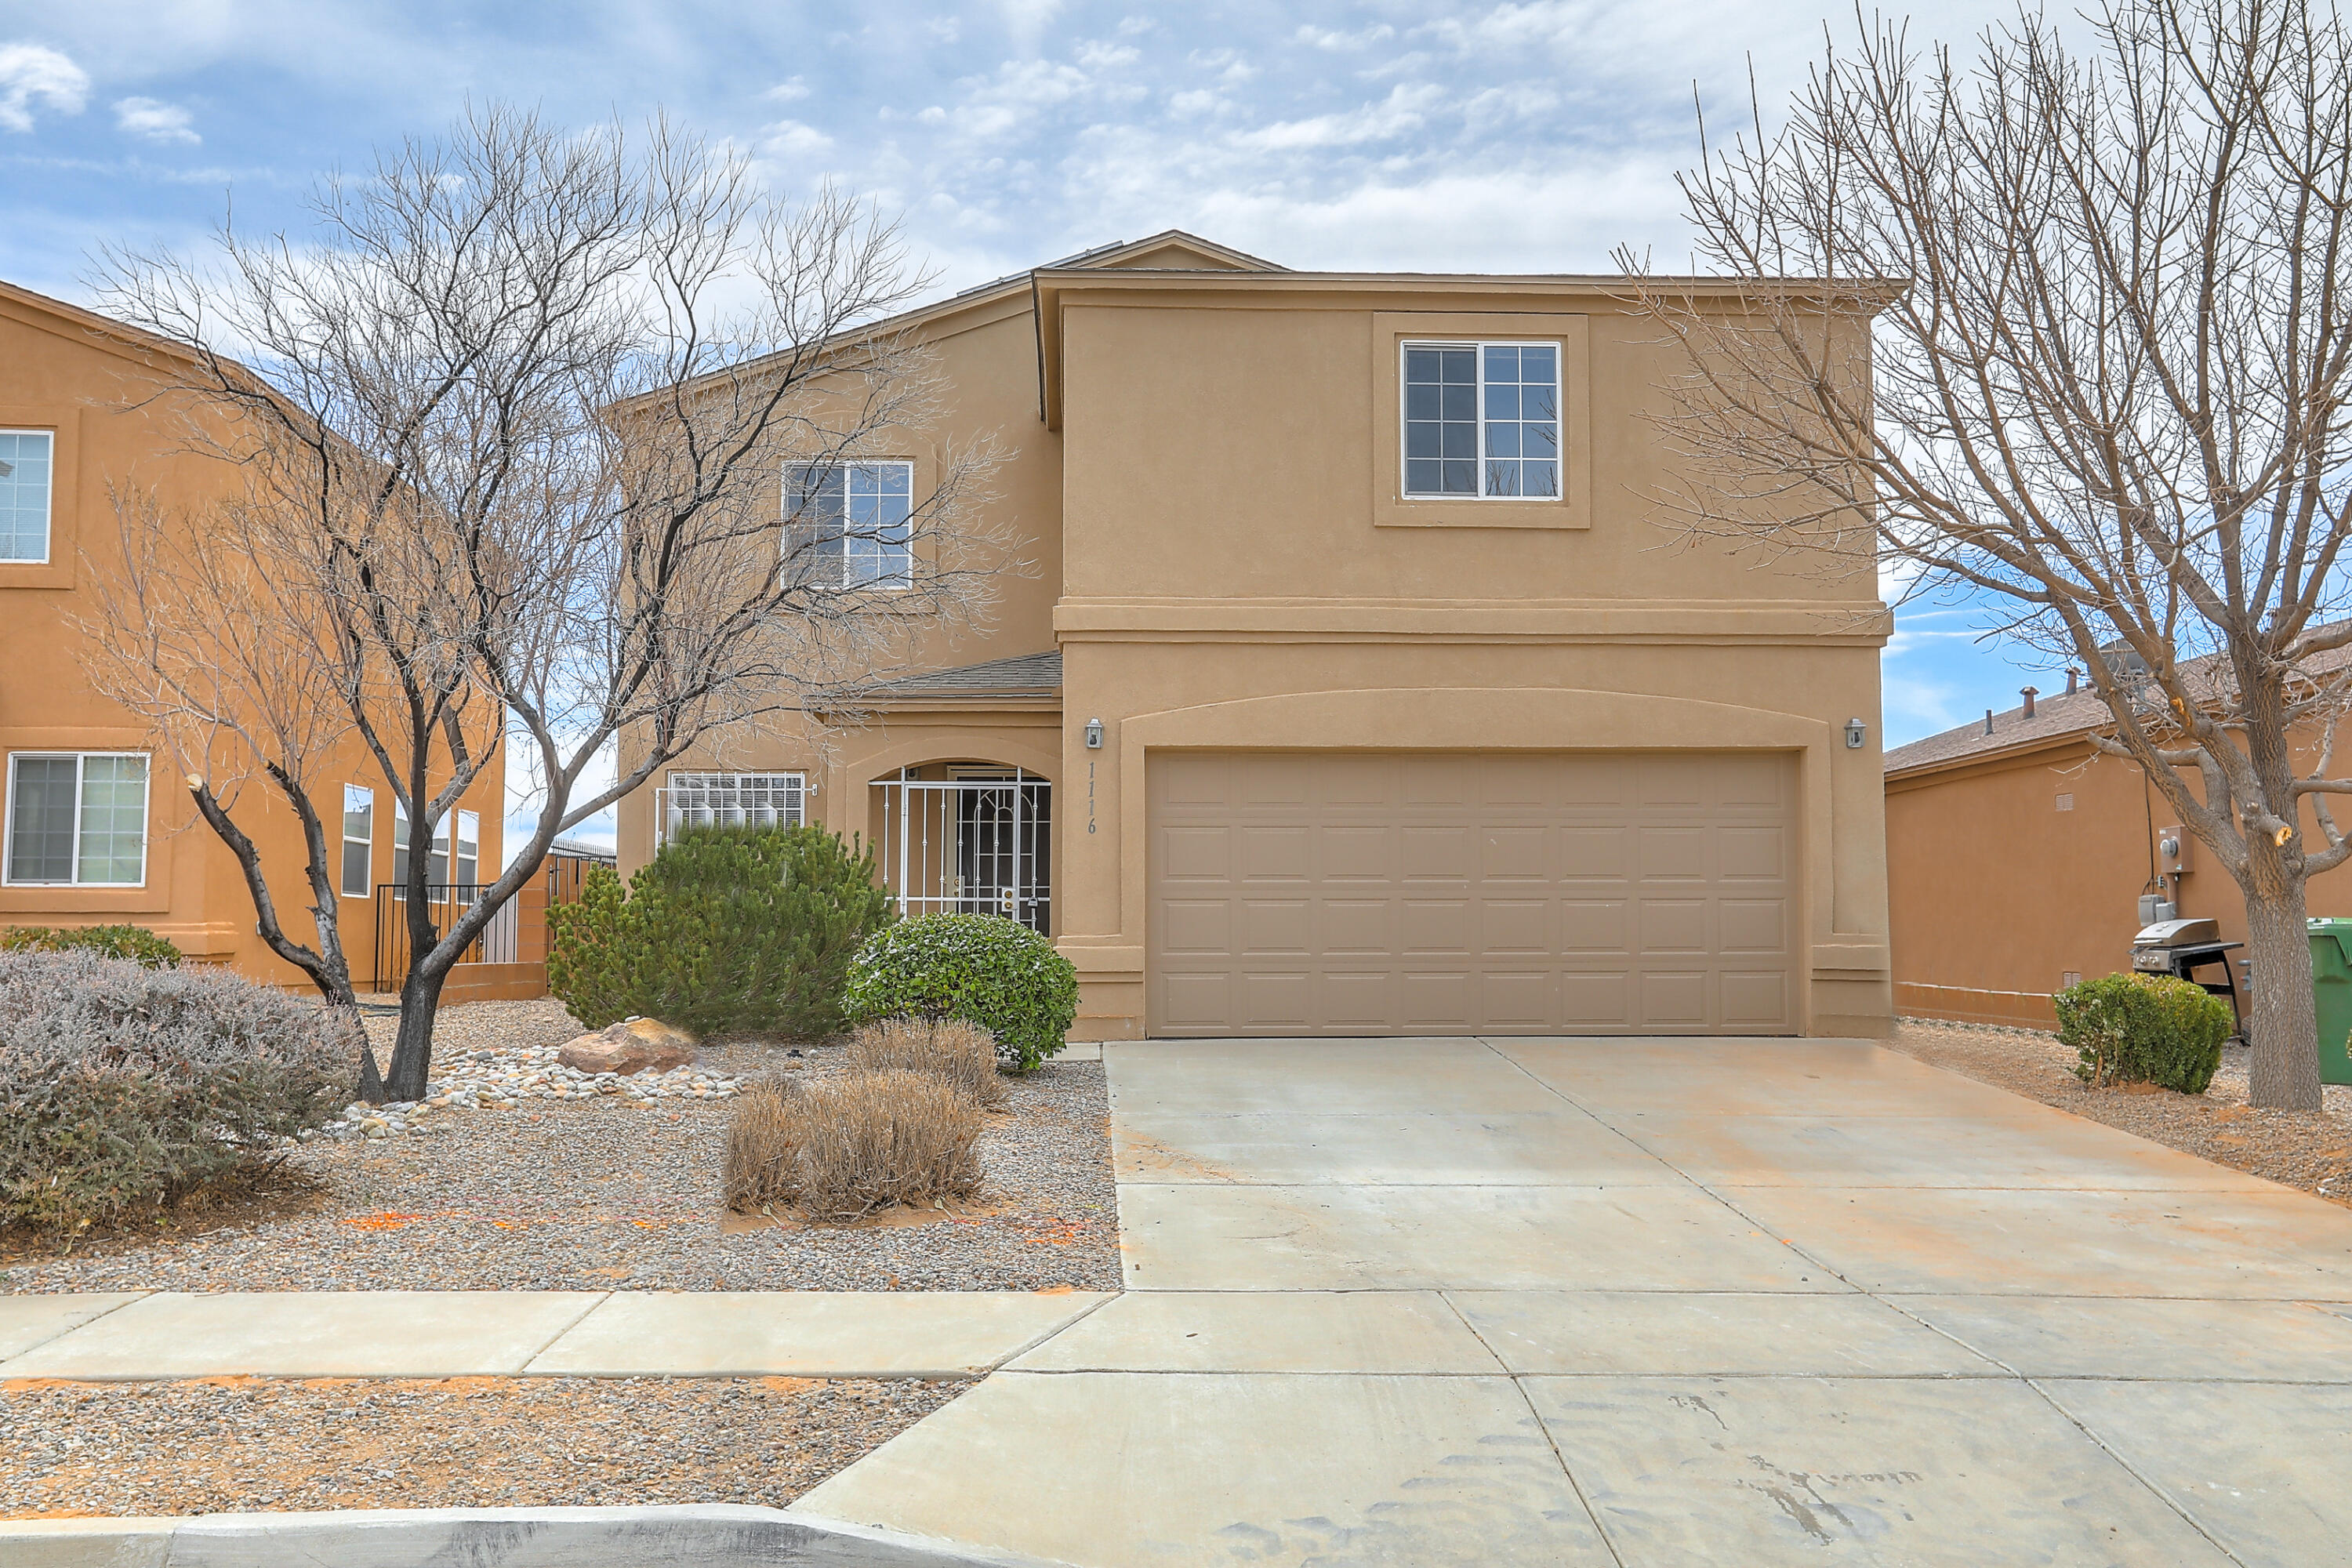 This spacious 4 bedroom/2.5 bath Rio Rancho family home is located in the popular Nothern Meadows neighborhood in the highly rated RioRancho school district. This two-story floor plan has an open layout kitchen, dining and features two spacious living areas. Enjoy new carpet and fresh paint onthe lower lever. Upstairs you will find a spacious loft. The bedrooms are roomy with nice walk-in closet in the primary bedroom. Home has solar panels that areowned not leased, making it efficient with very low electric bills. Garage has a garage screen door which is nice when working on projects in the garage. Securitywrought iron at front and back doors and on lower-level windows.